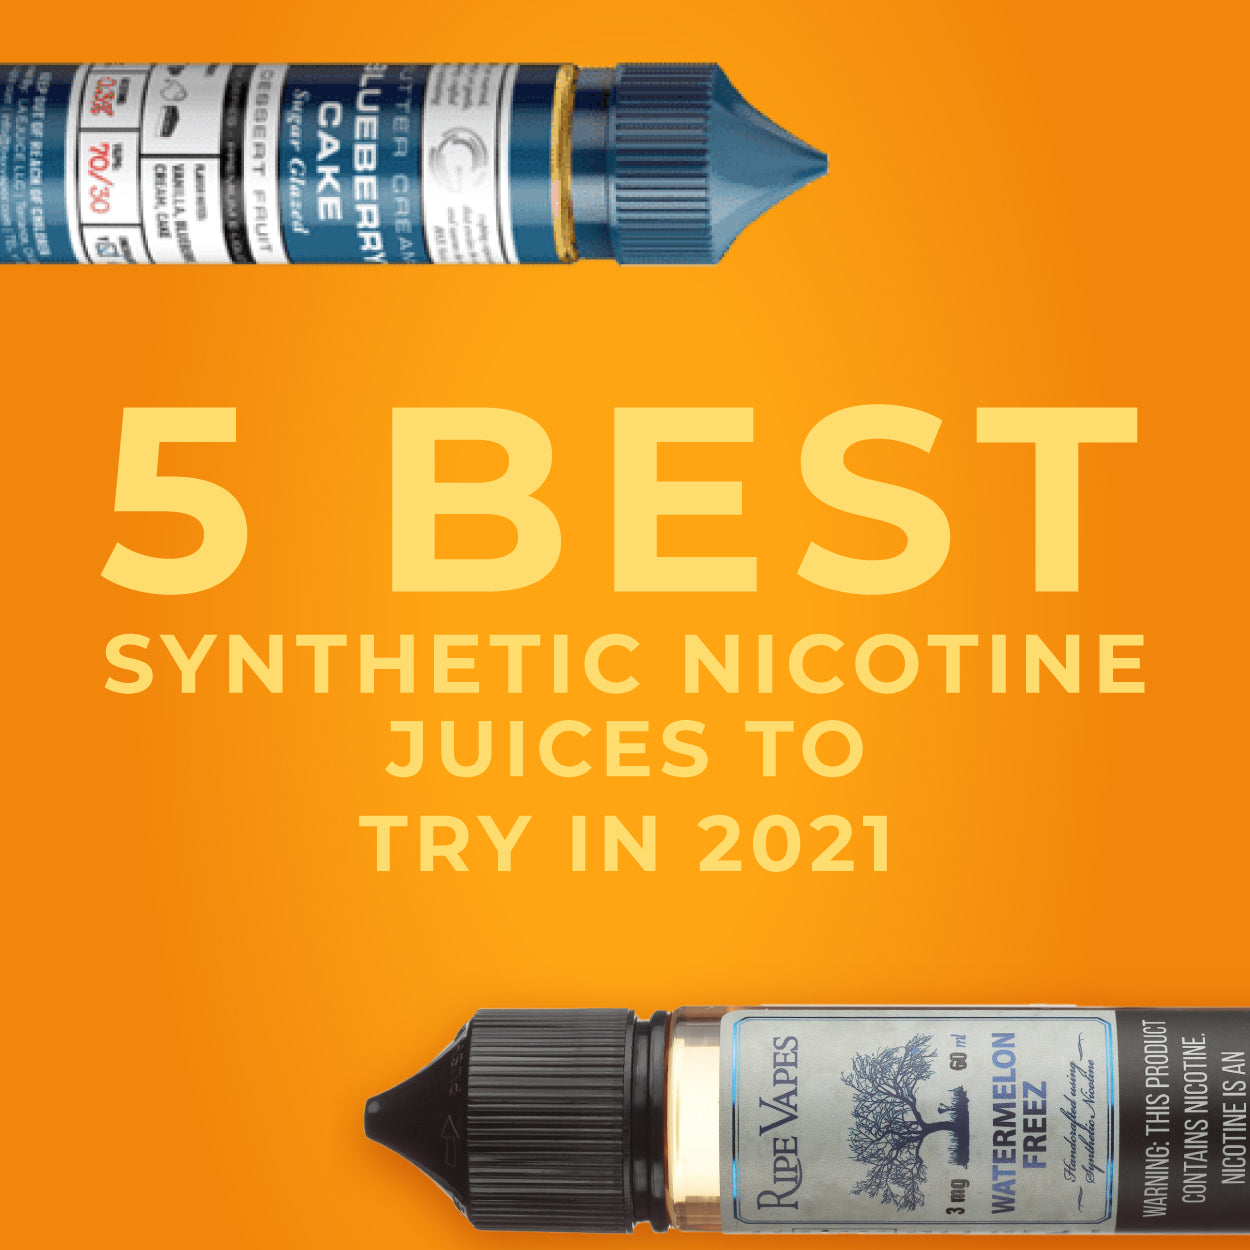 5 Best Synthetic Nicotine Juices to Try In 2021